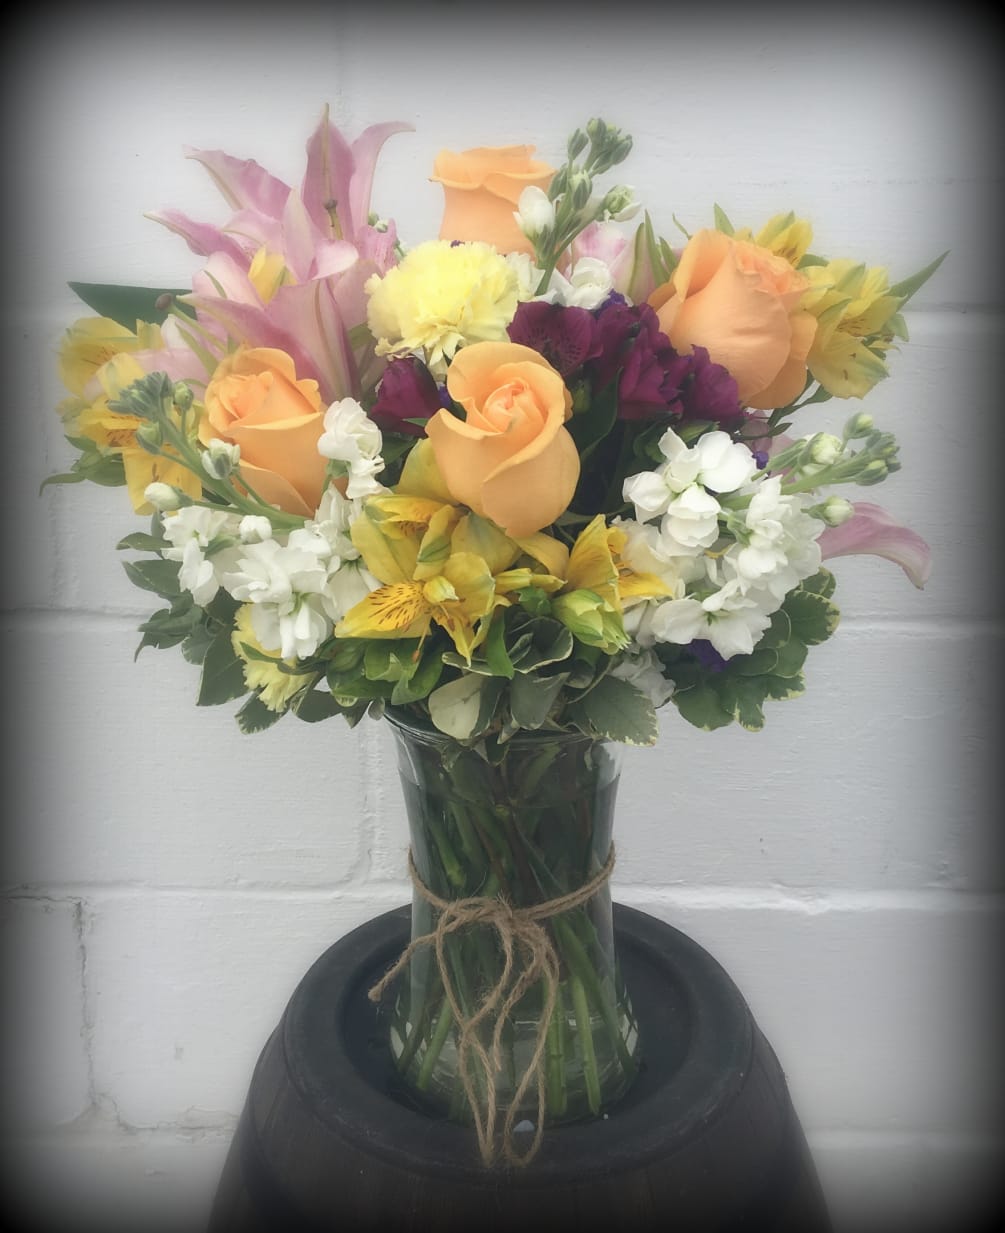 Peach Roses with mixed flowers give this vase arrangement a pretty garden